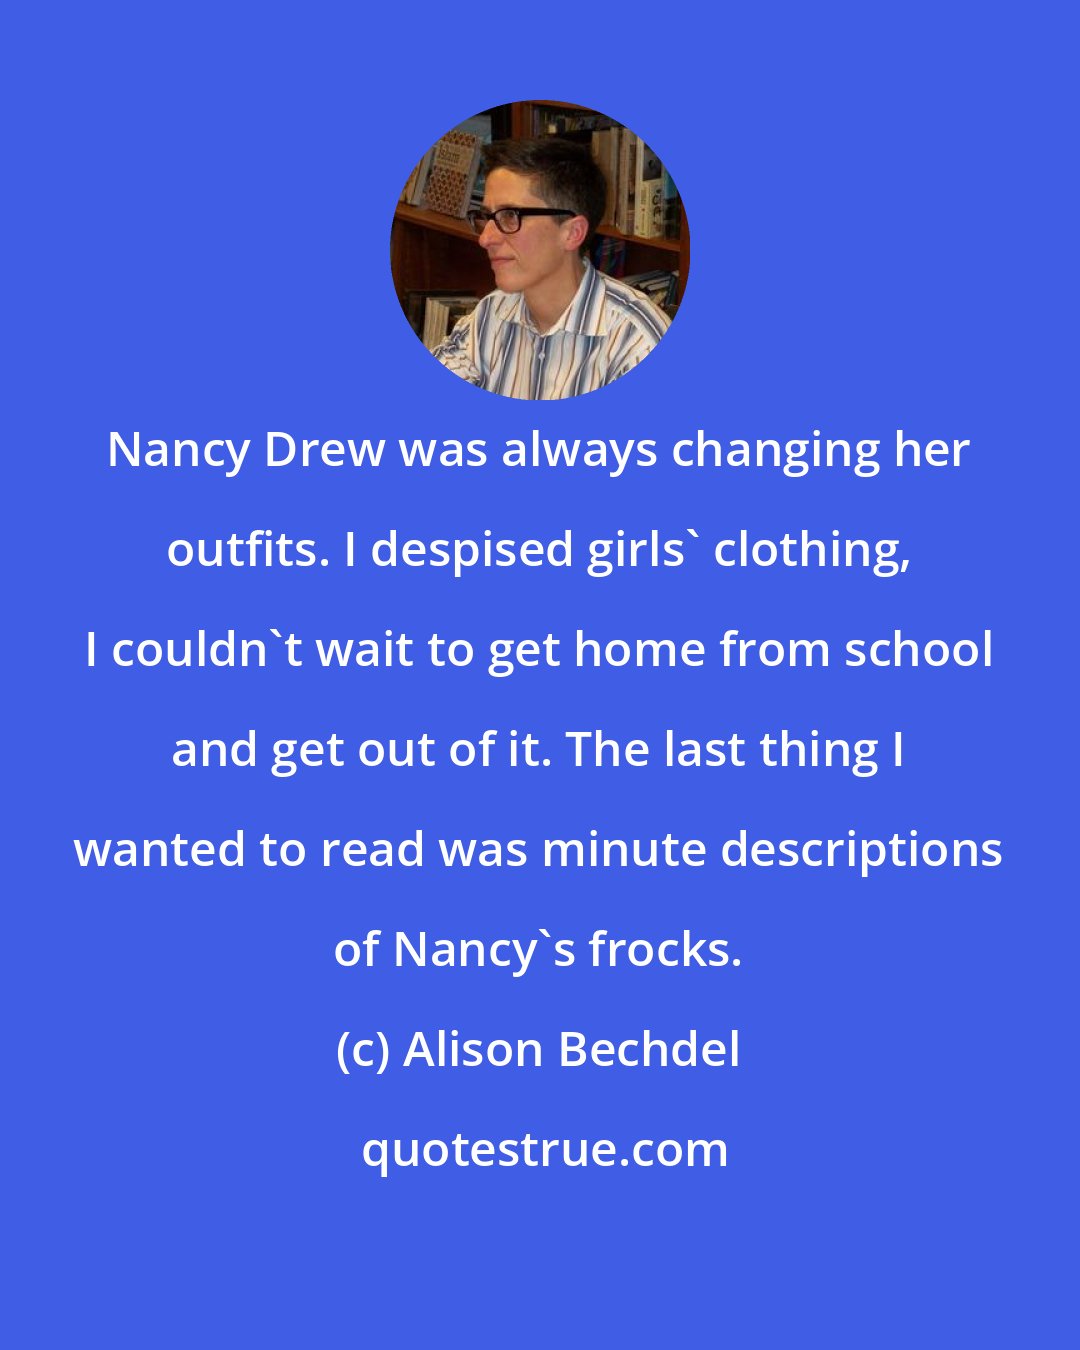 Alison Bechdel: Nancy Drew was always changing her outfits. I despised girls' clothing, I couldn't wait to get home from school and get out of it. The last thing I wanted to read was minute descriptions of Nancy's frocks.